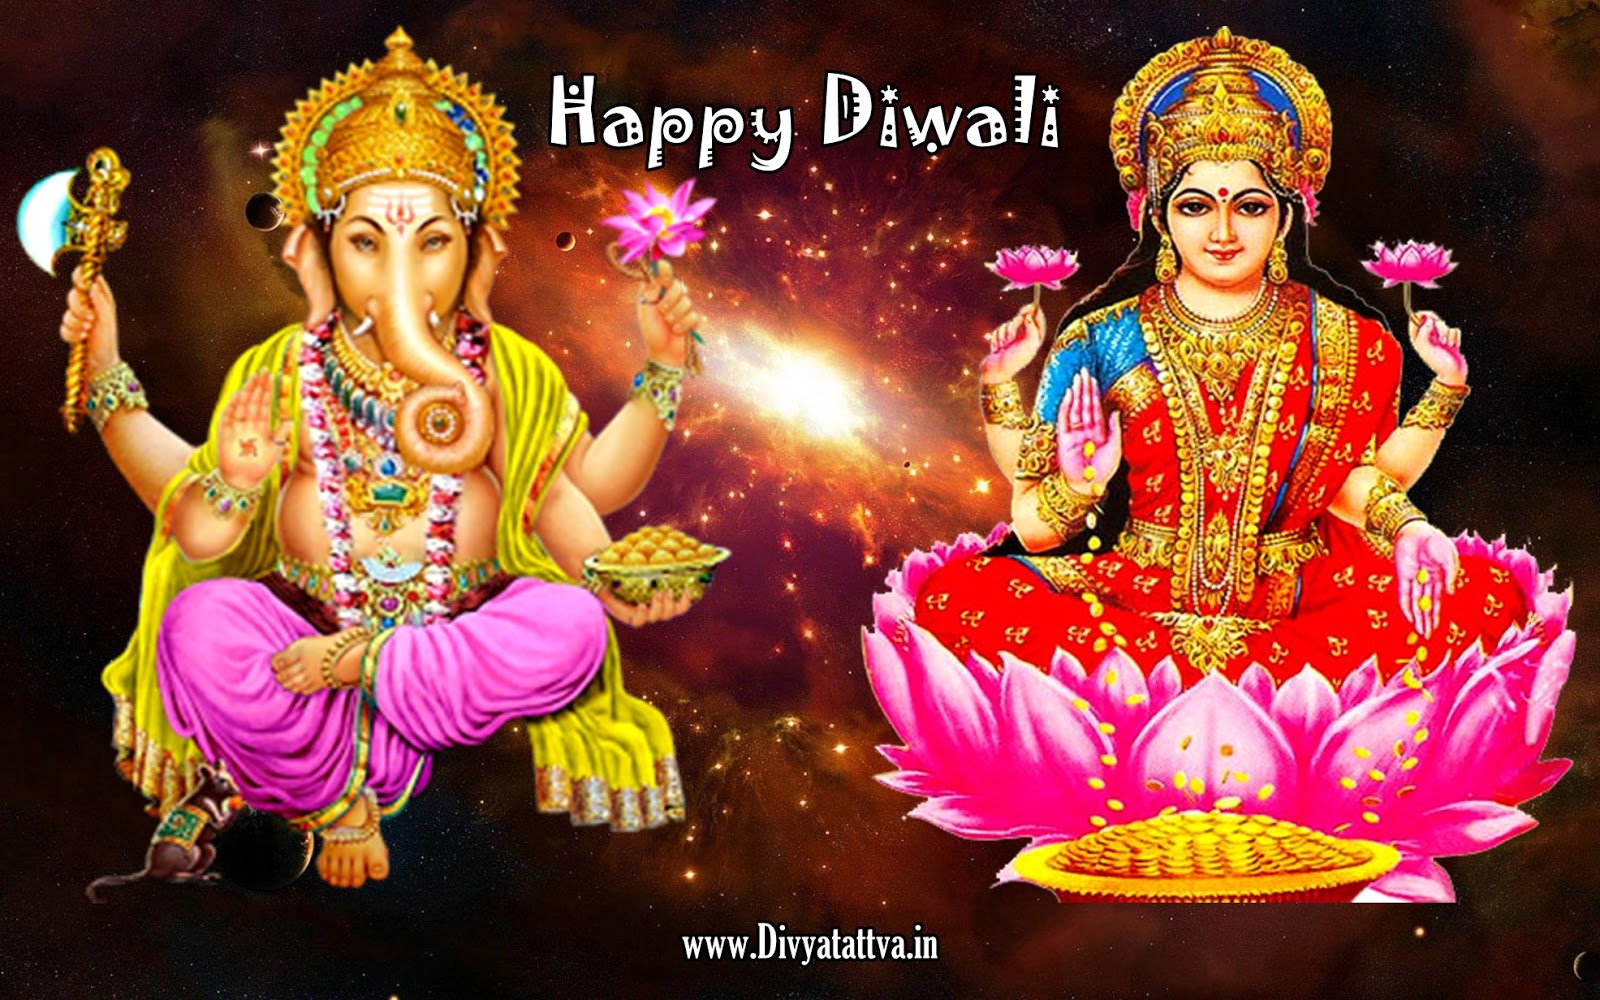 Diwali Hd Wallpaper Greetings Background Images & Decoration Pictures